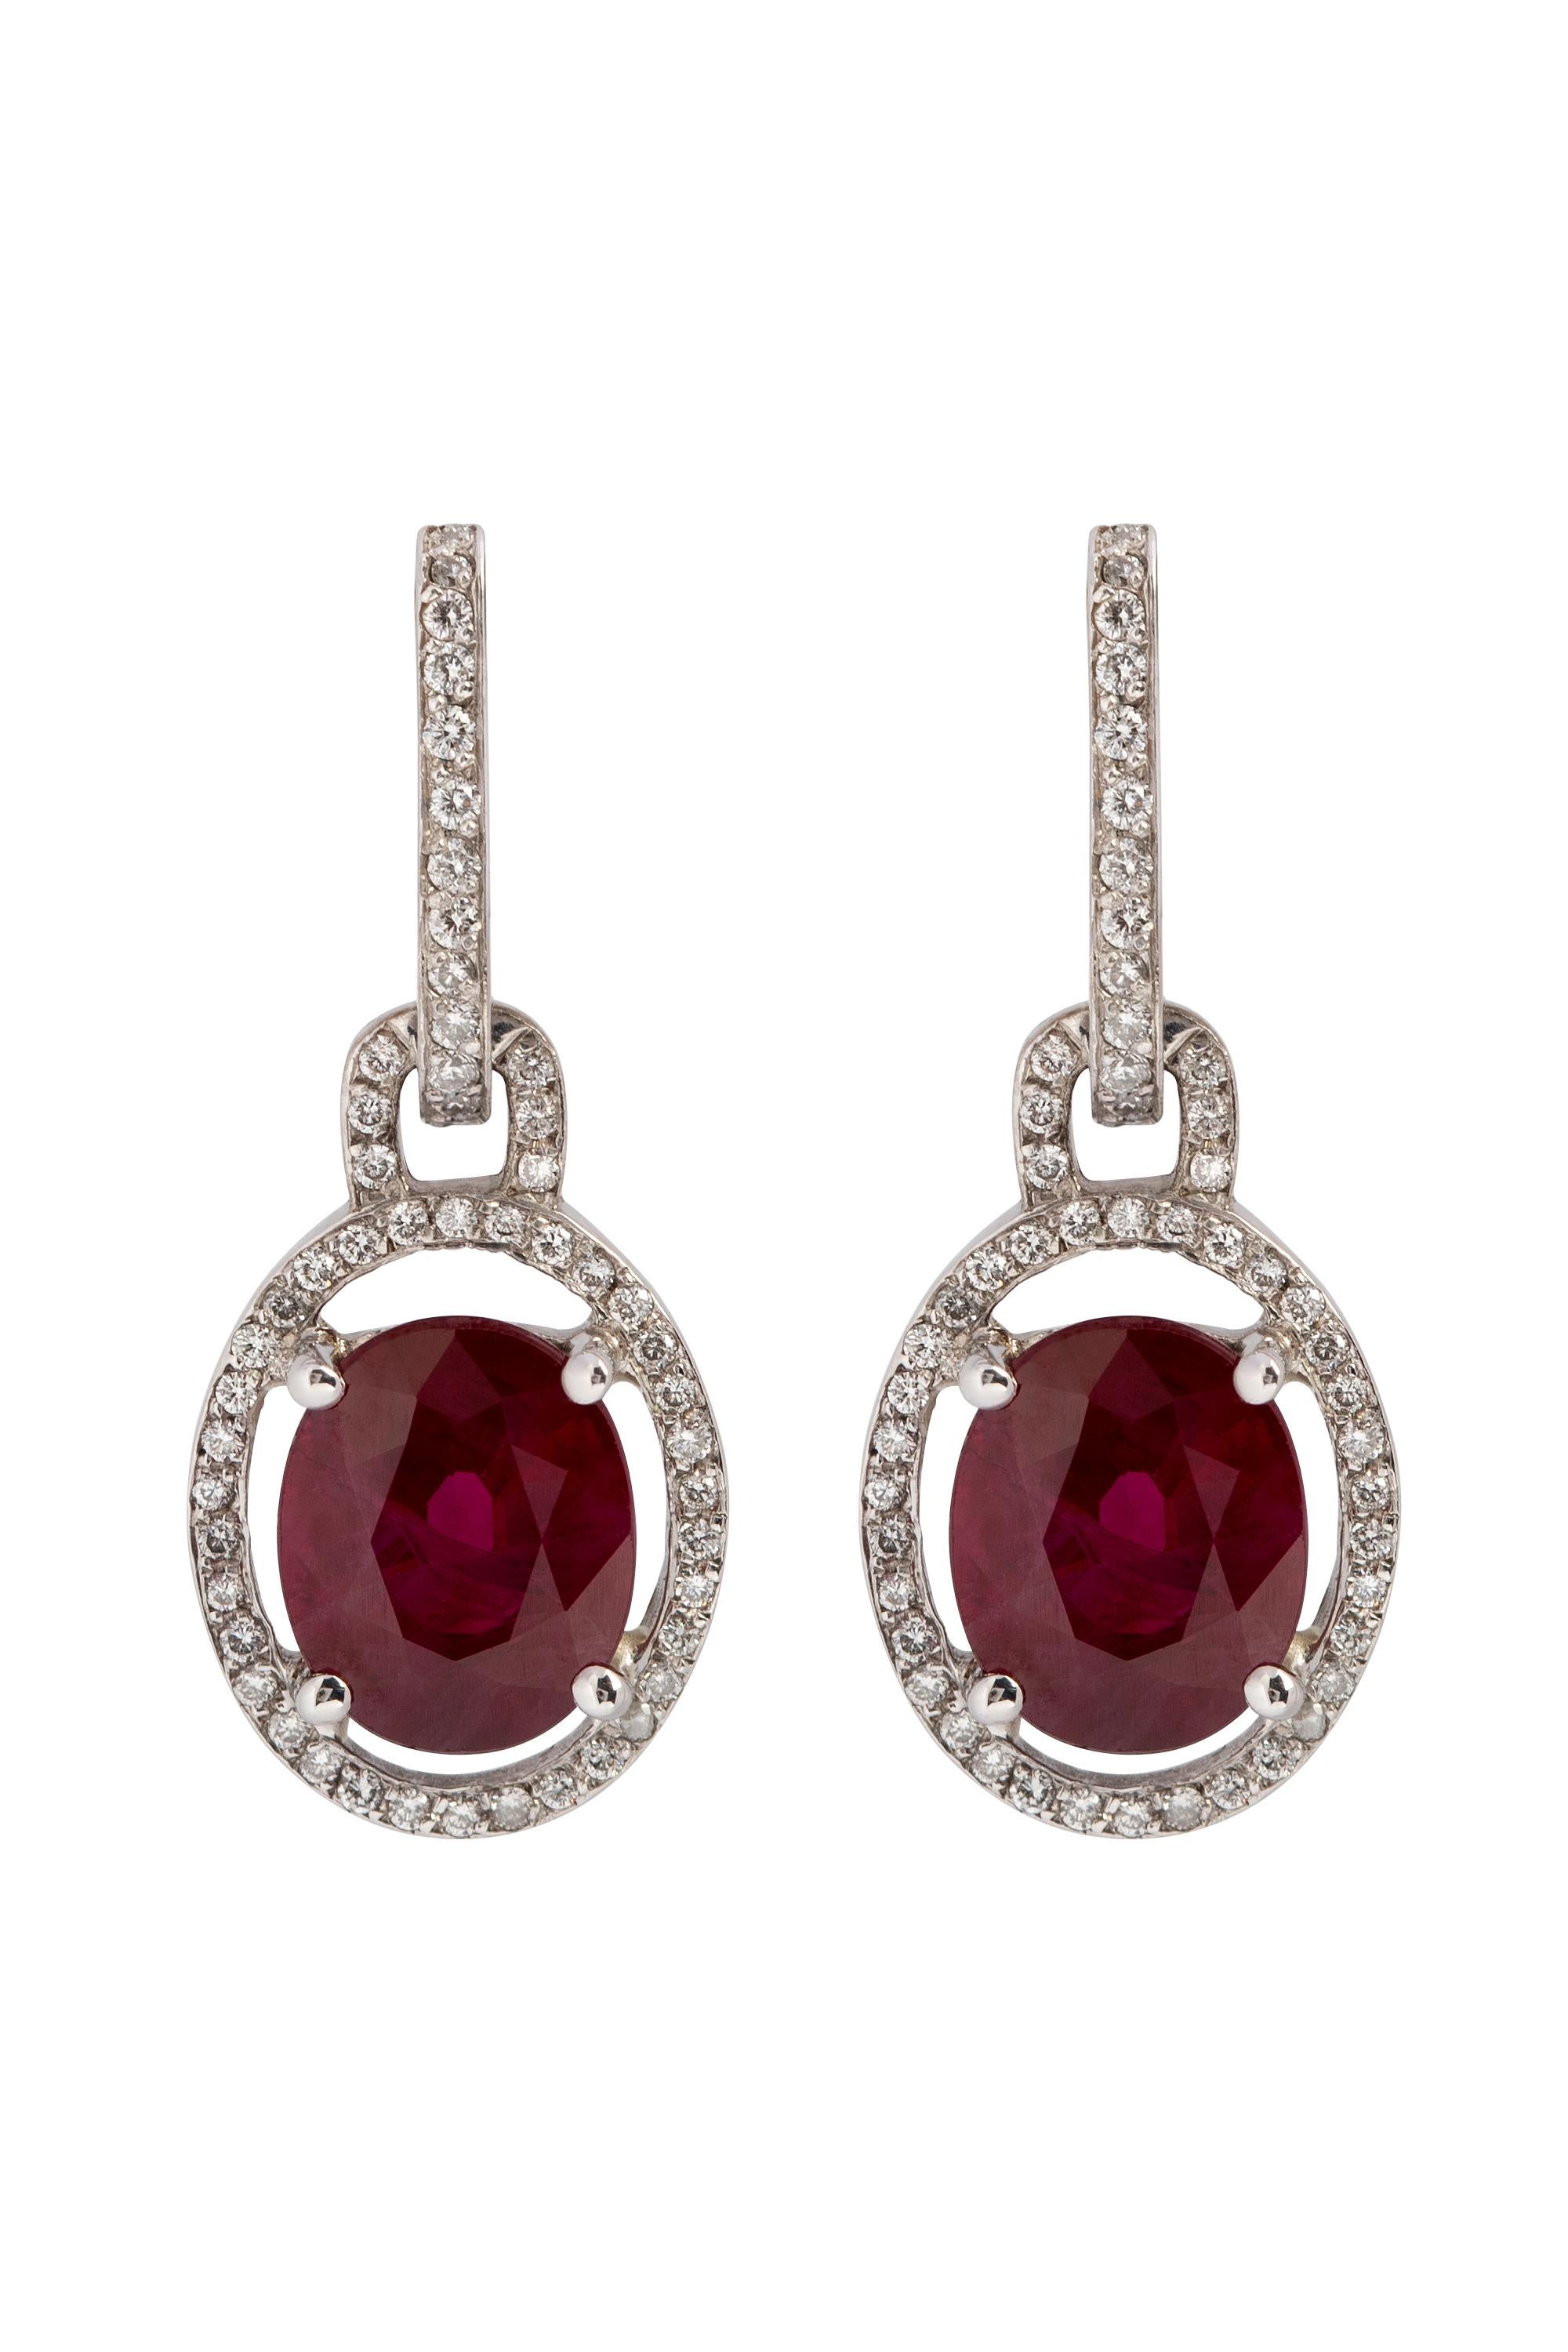 Oval Cut Gems Are Forever 5 Carat Ruby and Pave Diamond Earrings For Sale